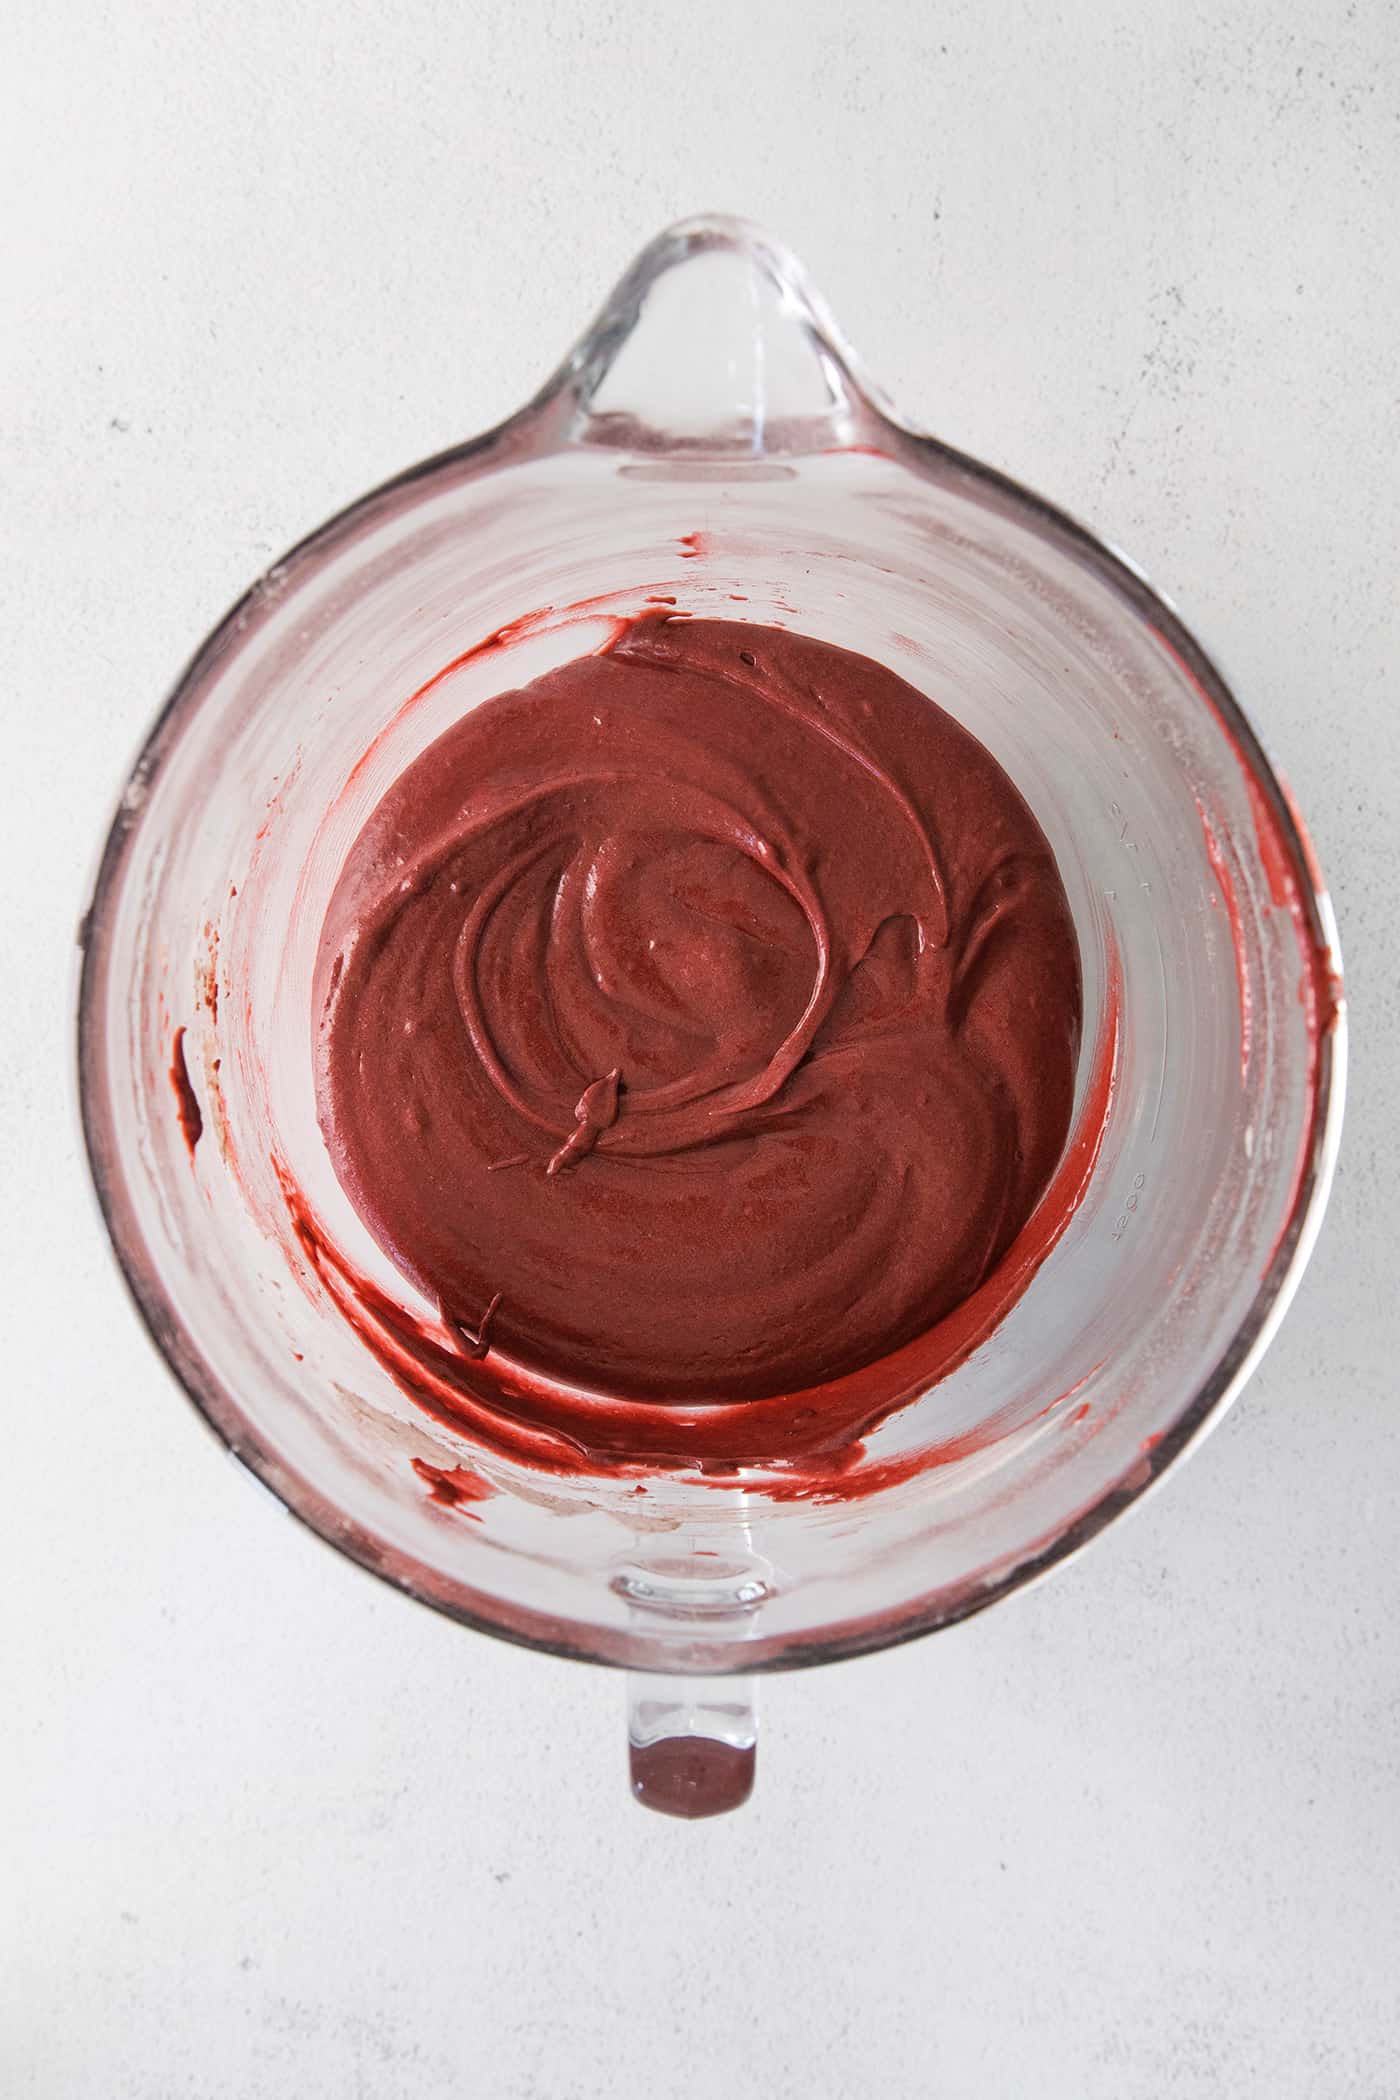 Red velvet cake mix in a mixing bowl